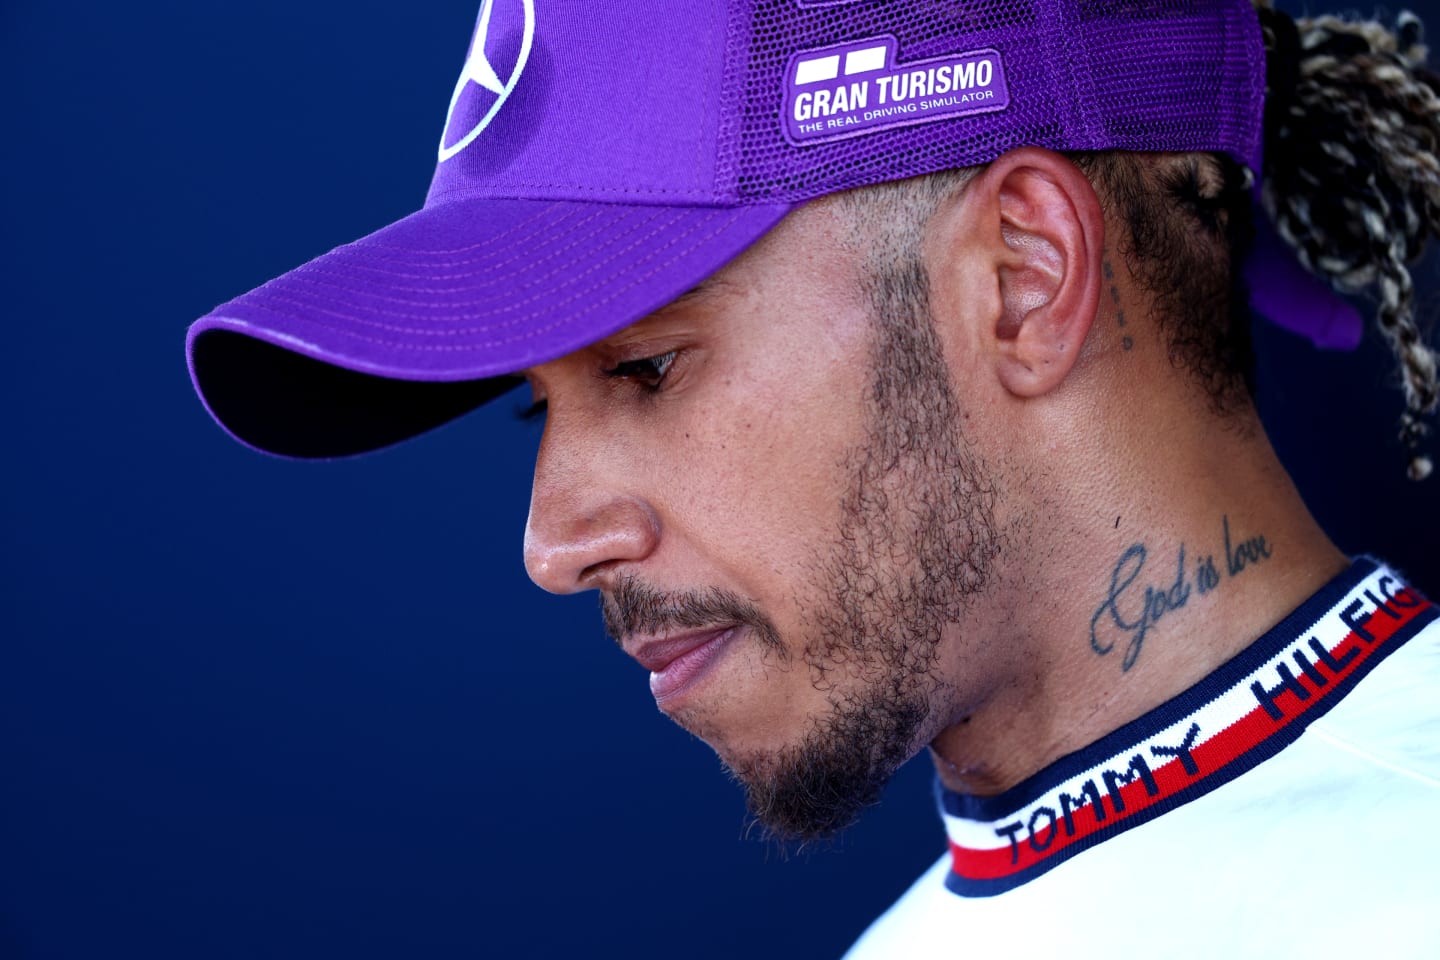 LE CASTELLET, FRANCE - JULY 24: Second placed Lewis Hamilton of Great Britain and Mercedes talks to